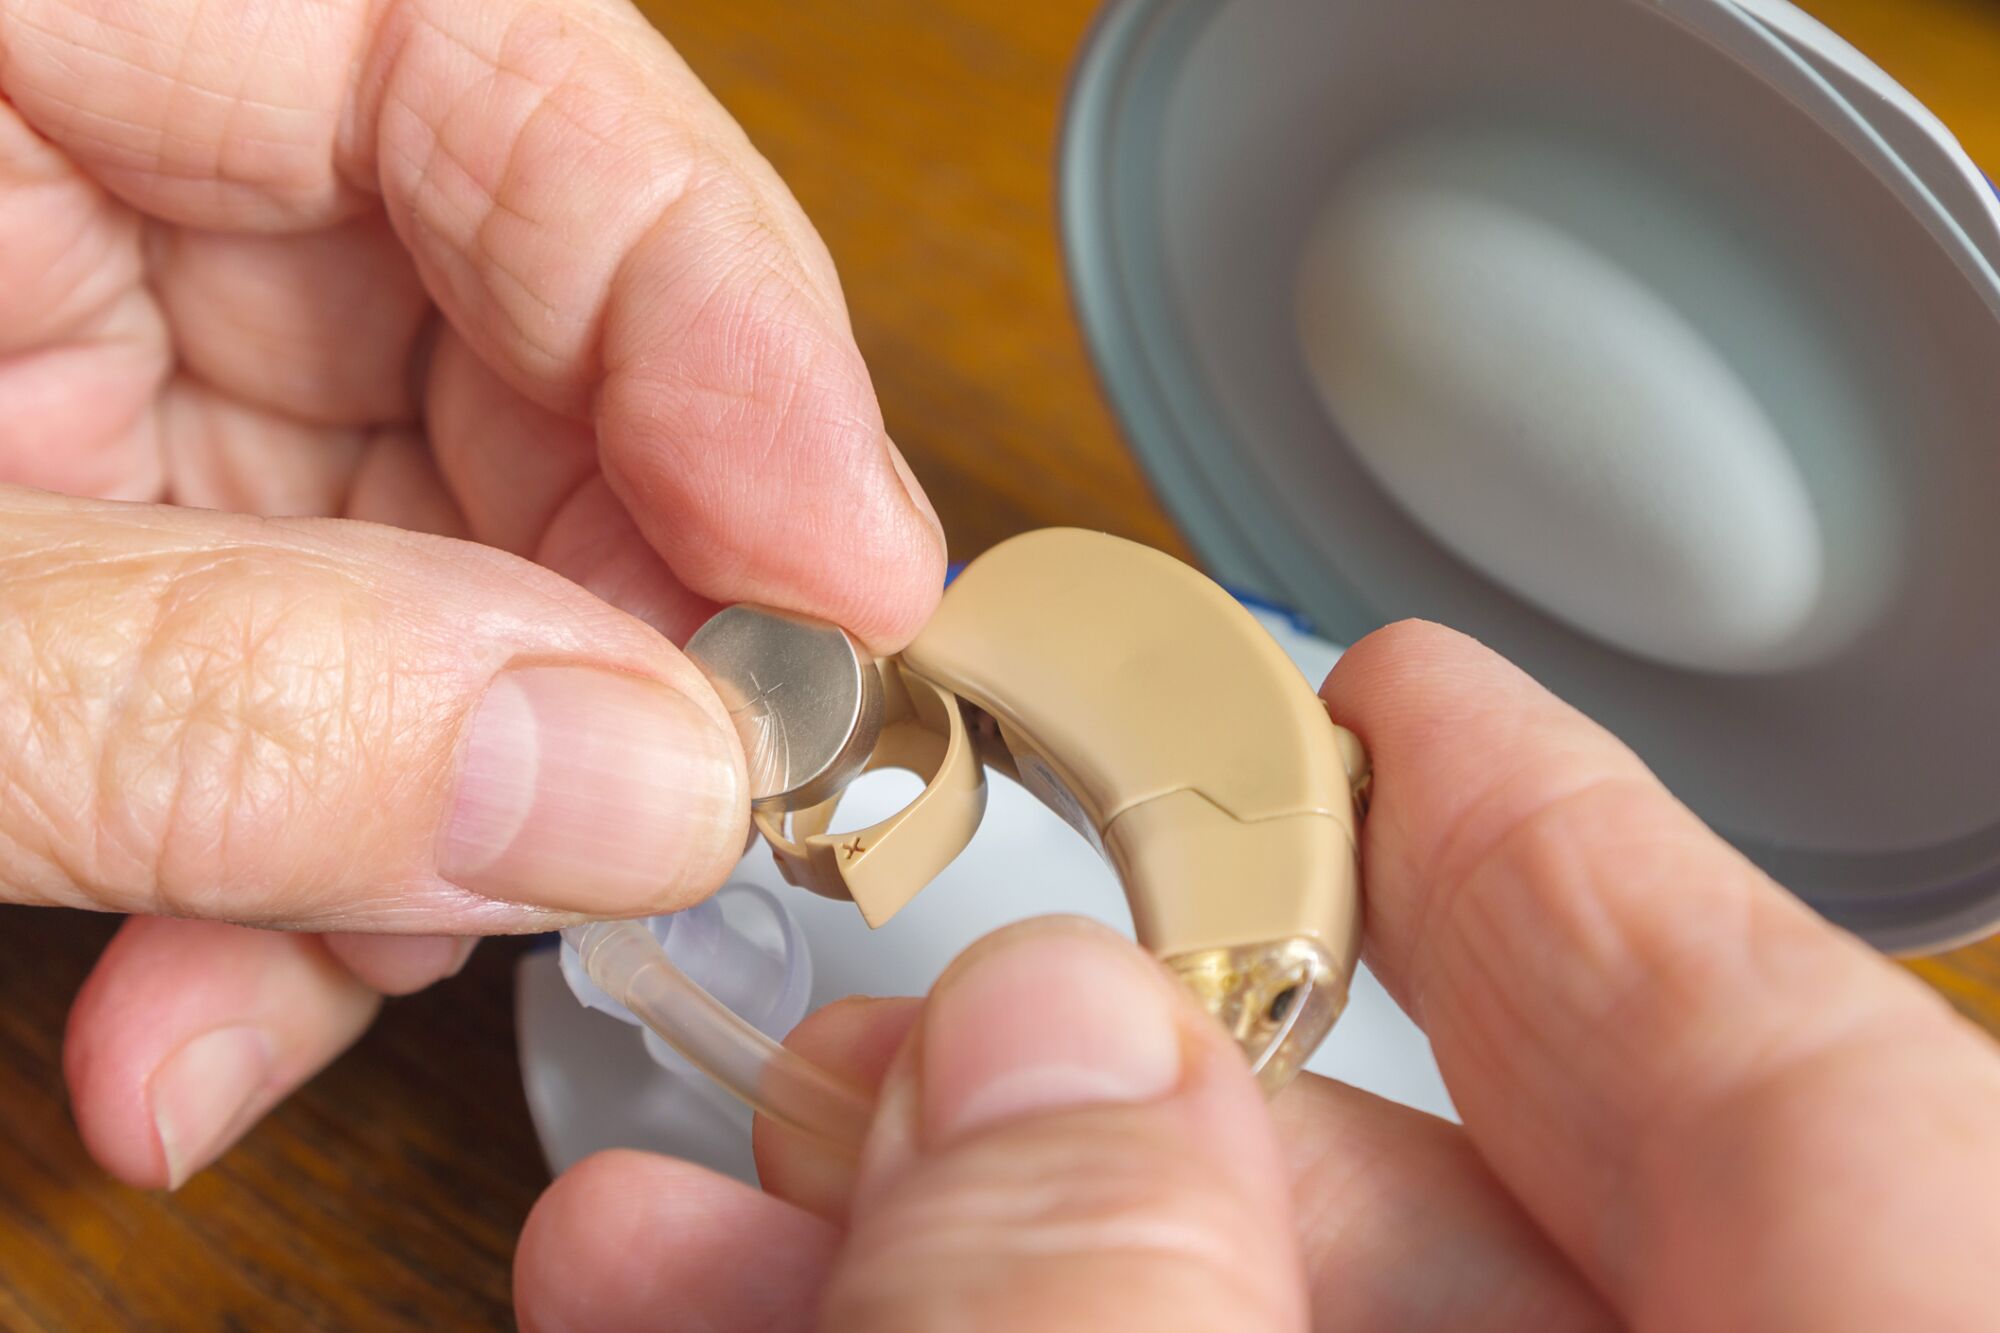 Learning to change hearing aid batteries and filters is an important skill for family caregivers.